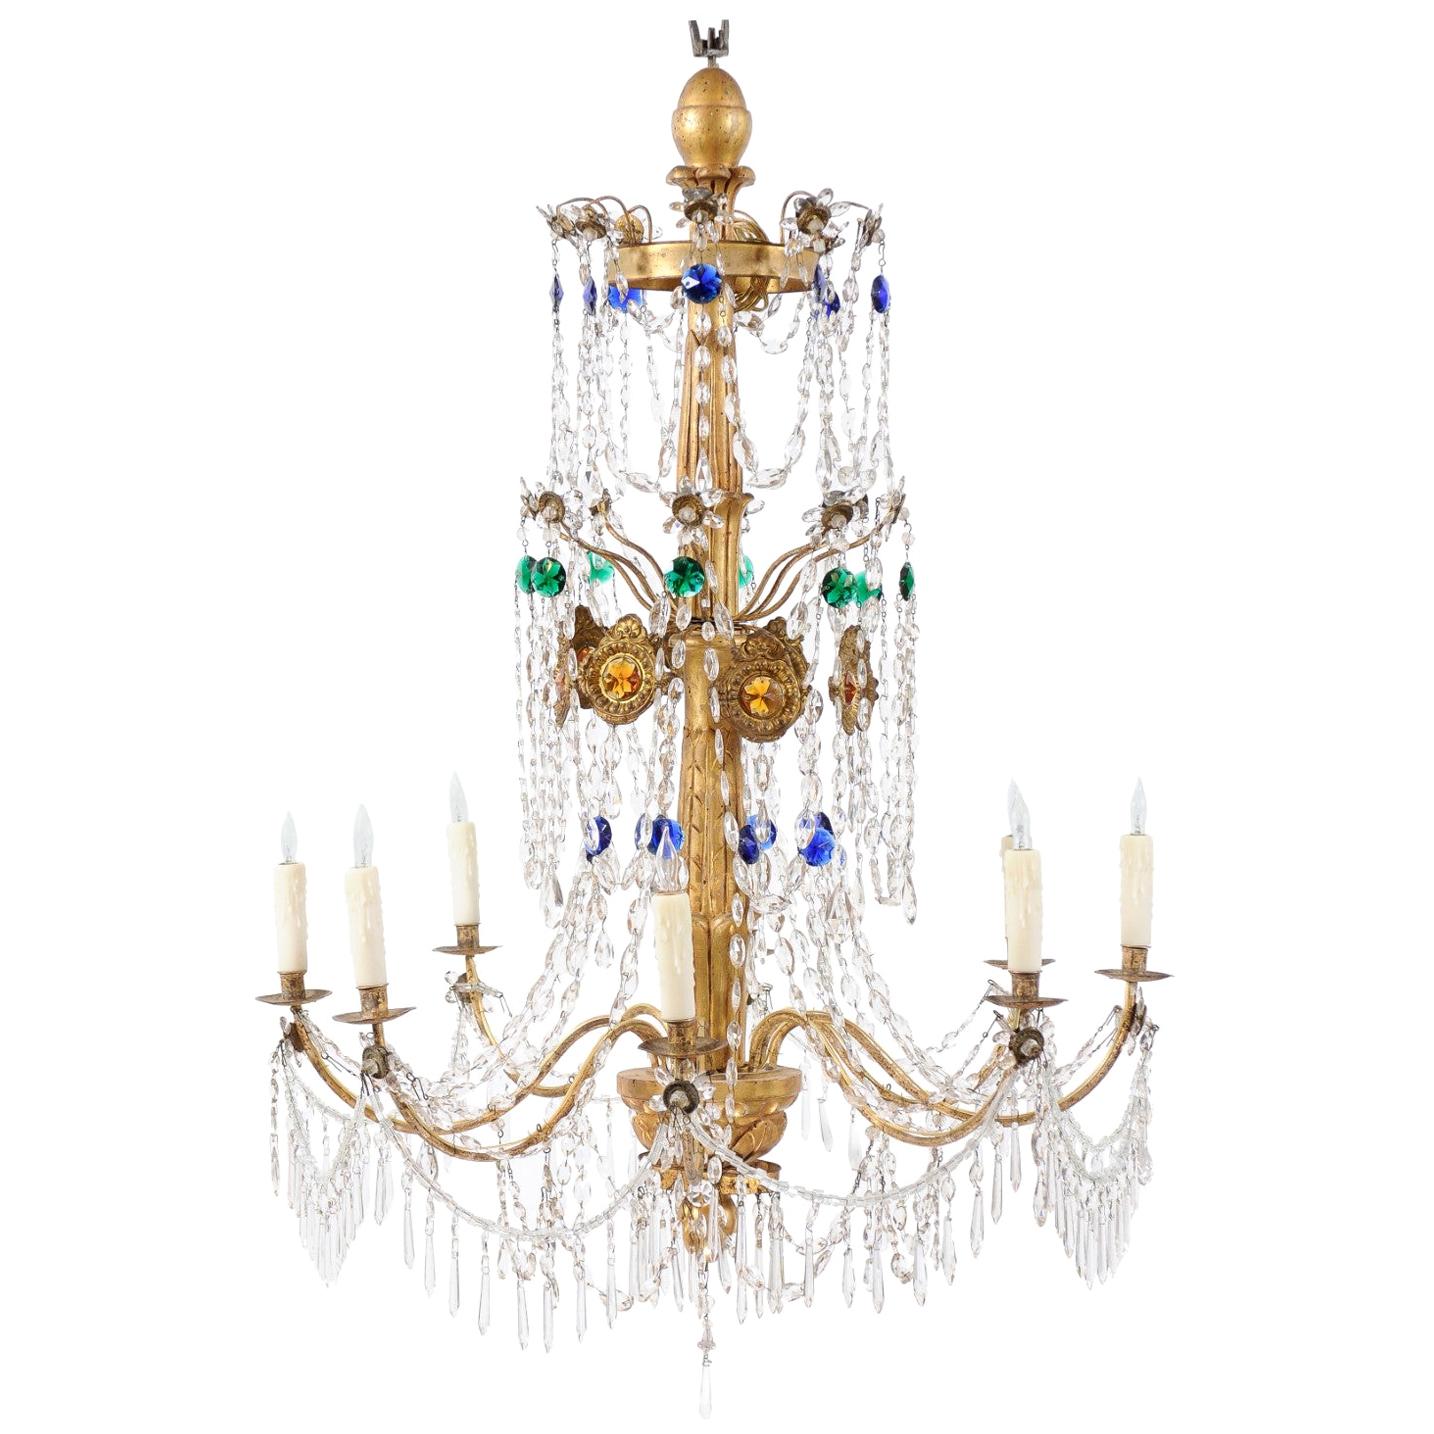 Italian Neoclassical Giltwood and Crystal 8-Light Chandelier, circa 1790